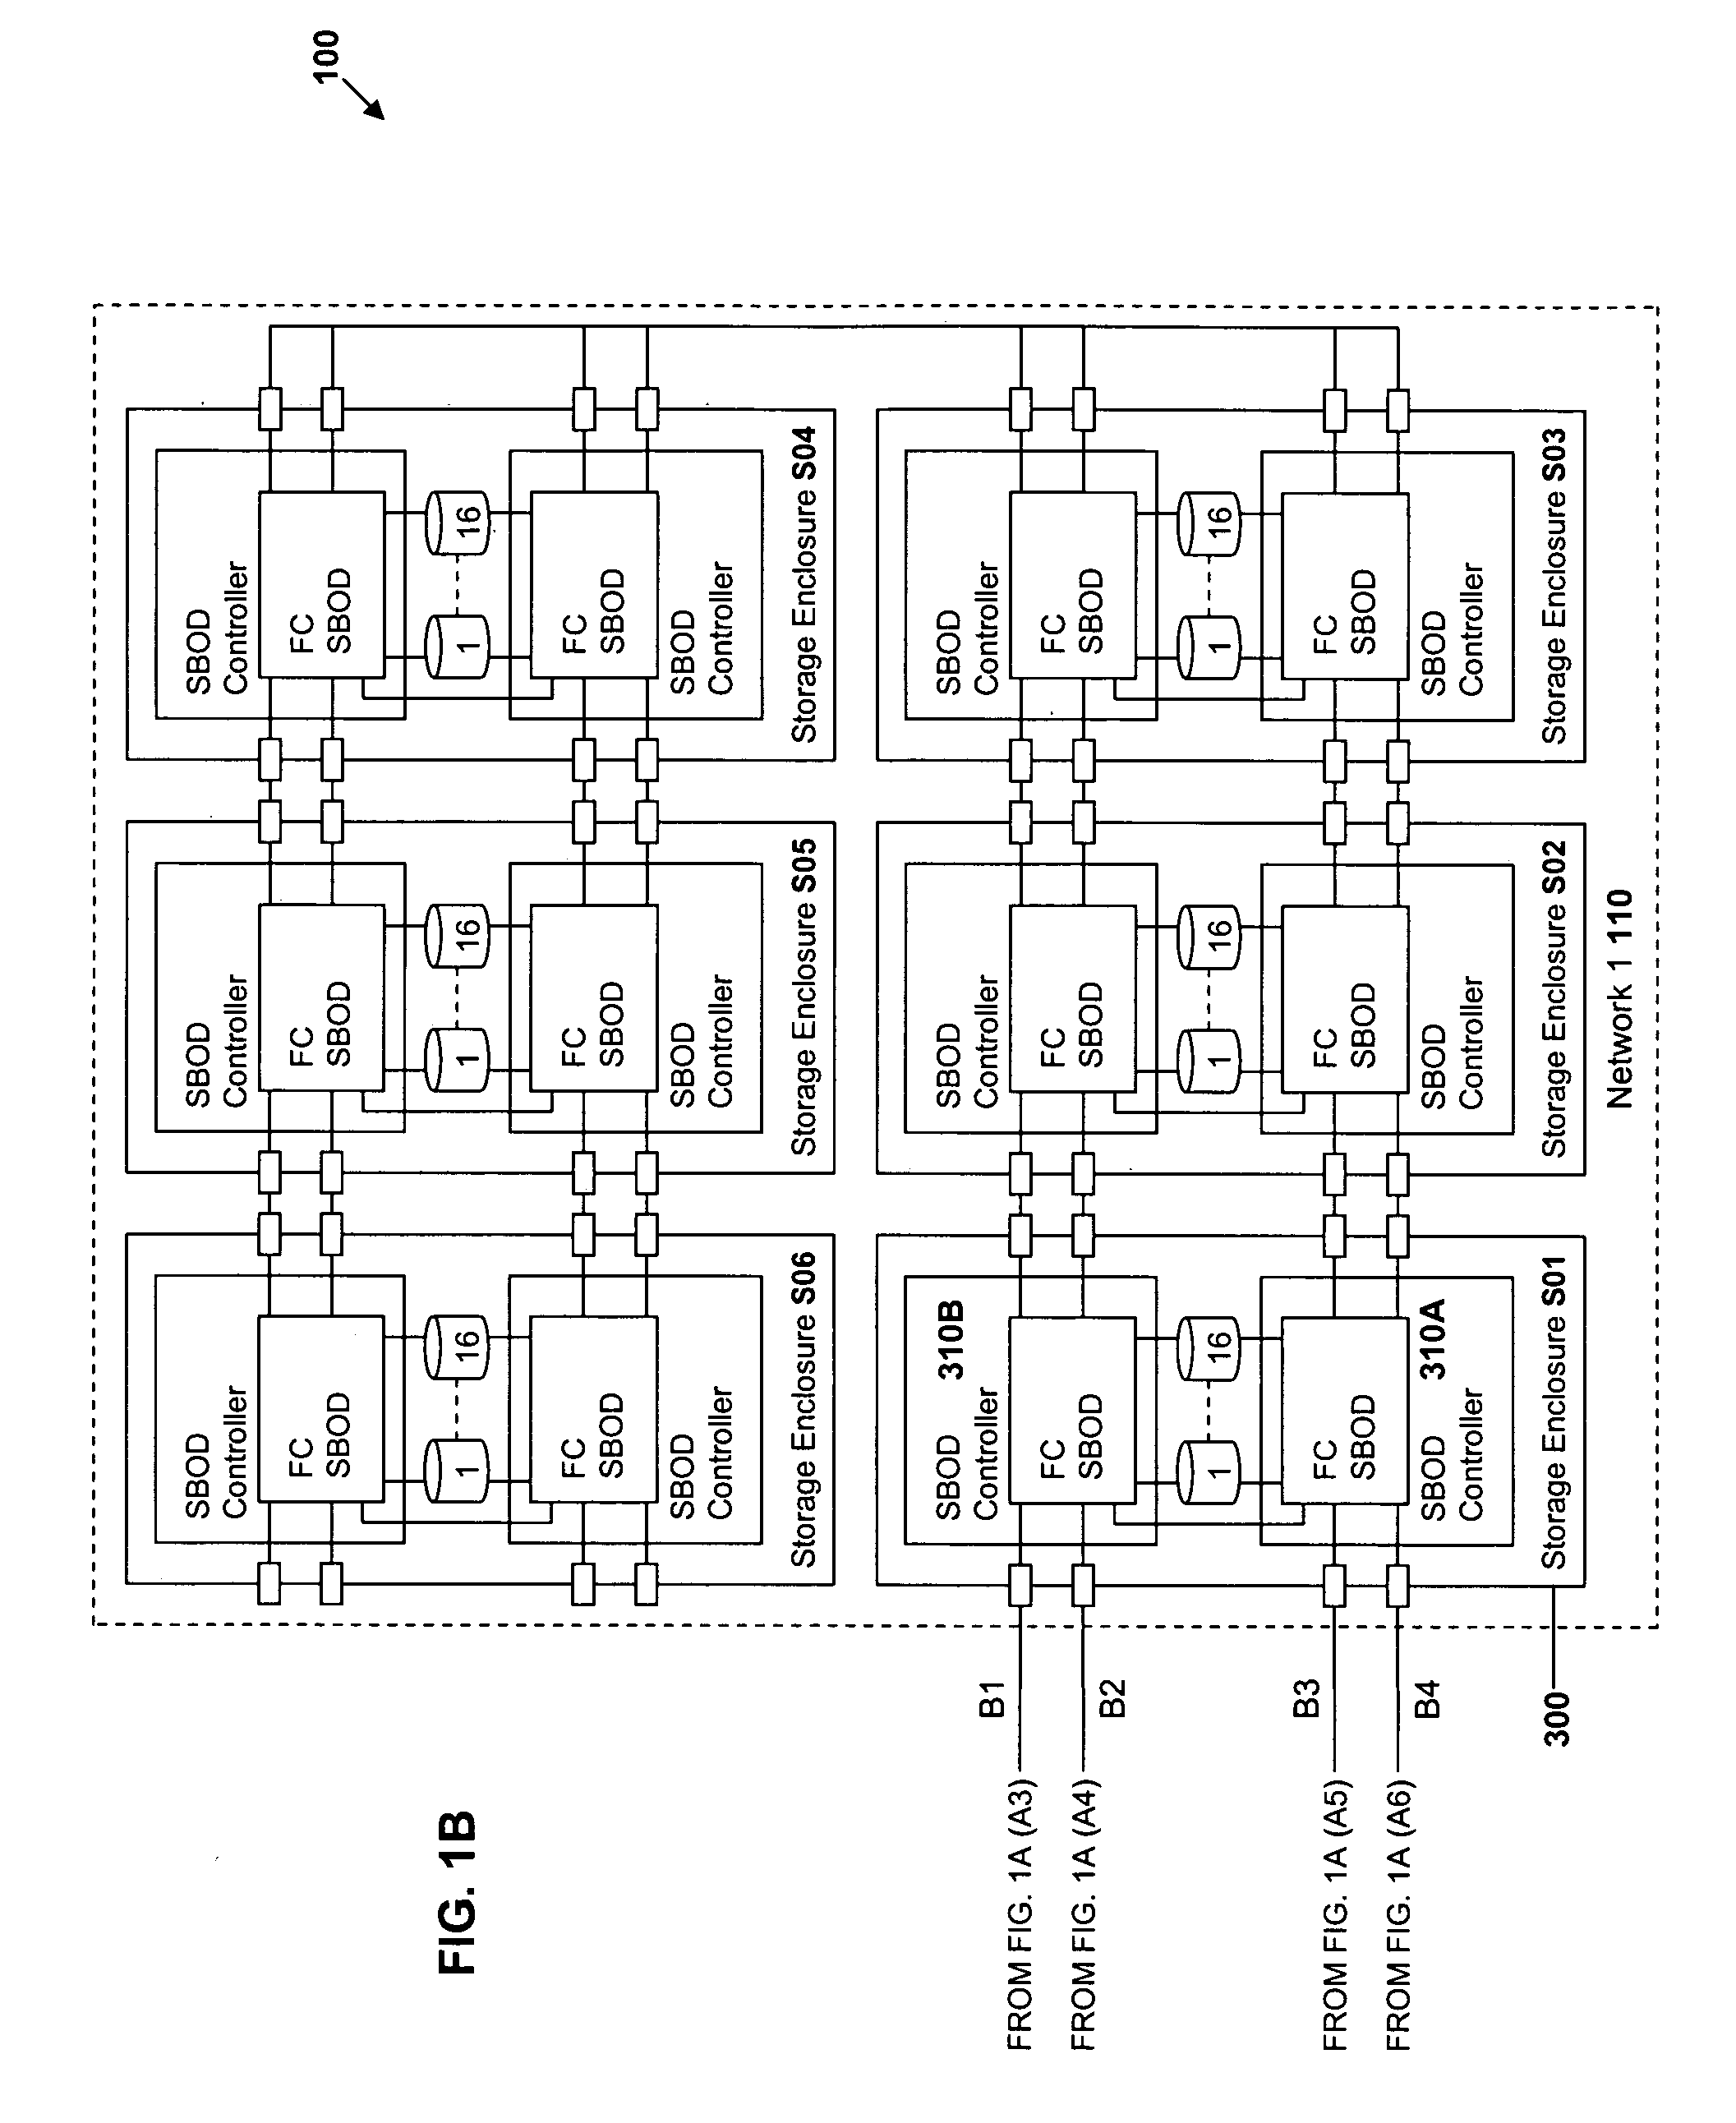 In-band control of indicators to identify devices distributed on the same domain